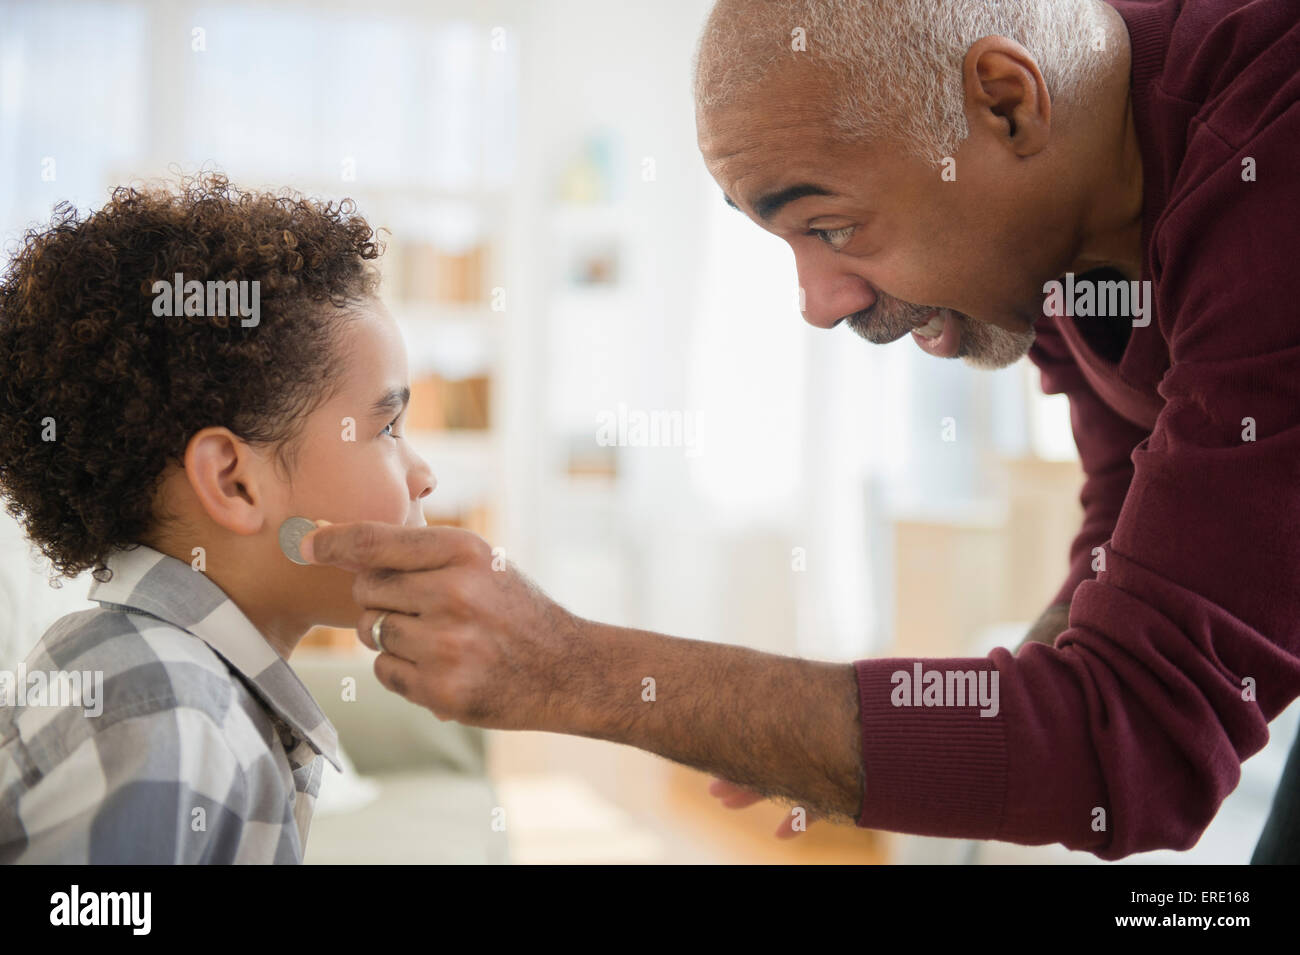 Mixed race grandfather pulling magic coin from ear of grandson Stock Photo